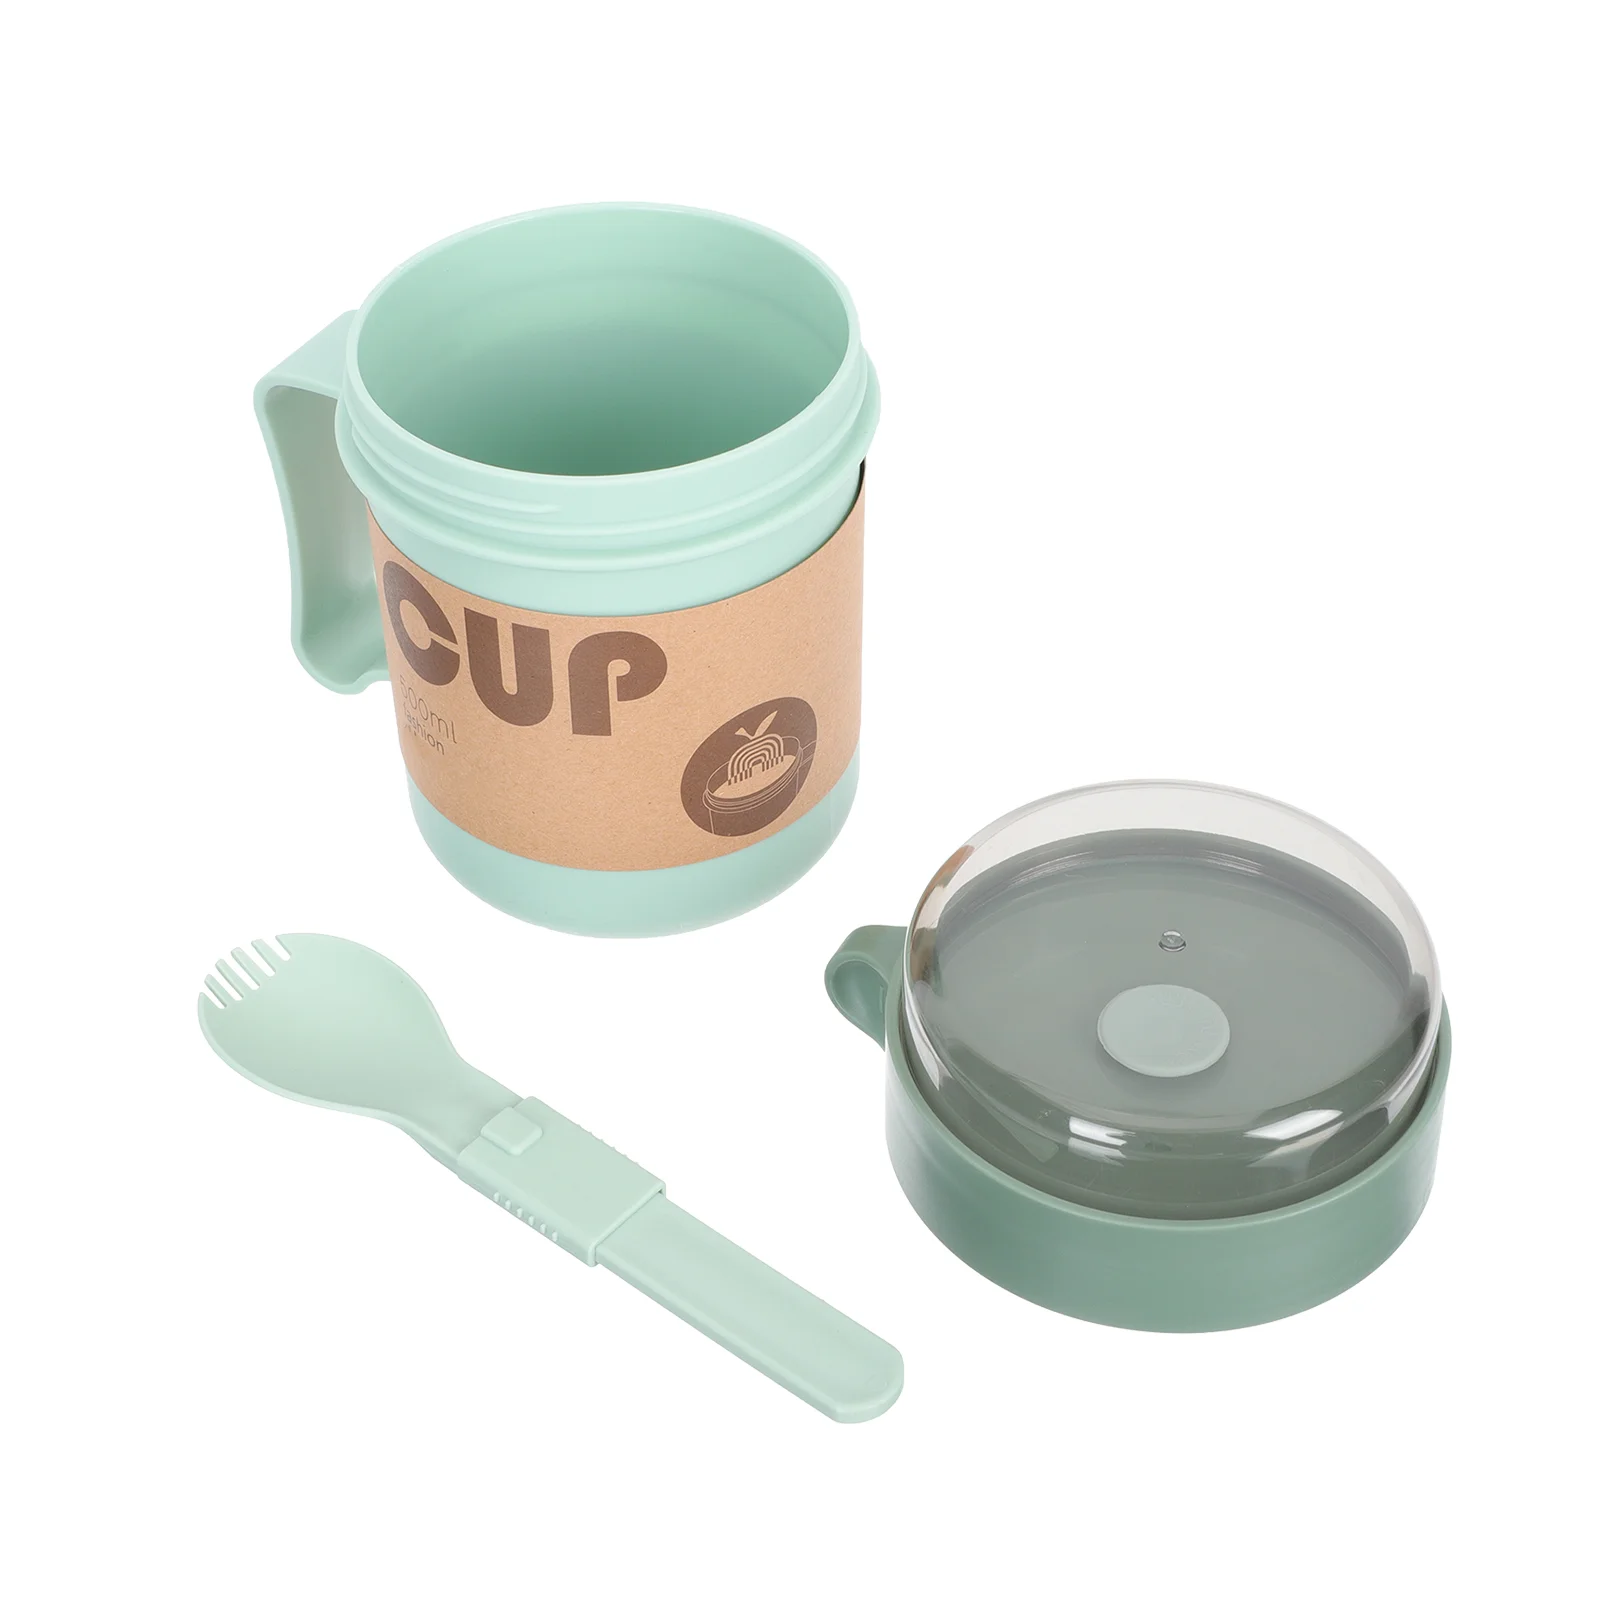 

Soup Cup Mug Bowl Microwave Lids Bowls Cereal Container Containers Breakfast Portable Food Lid Microwavable Box Lunch Mugs Cups